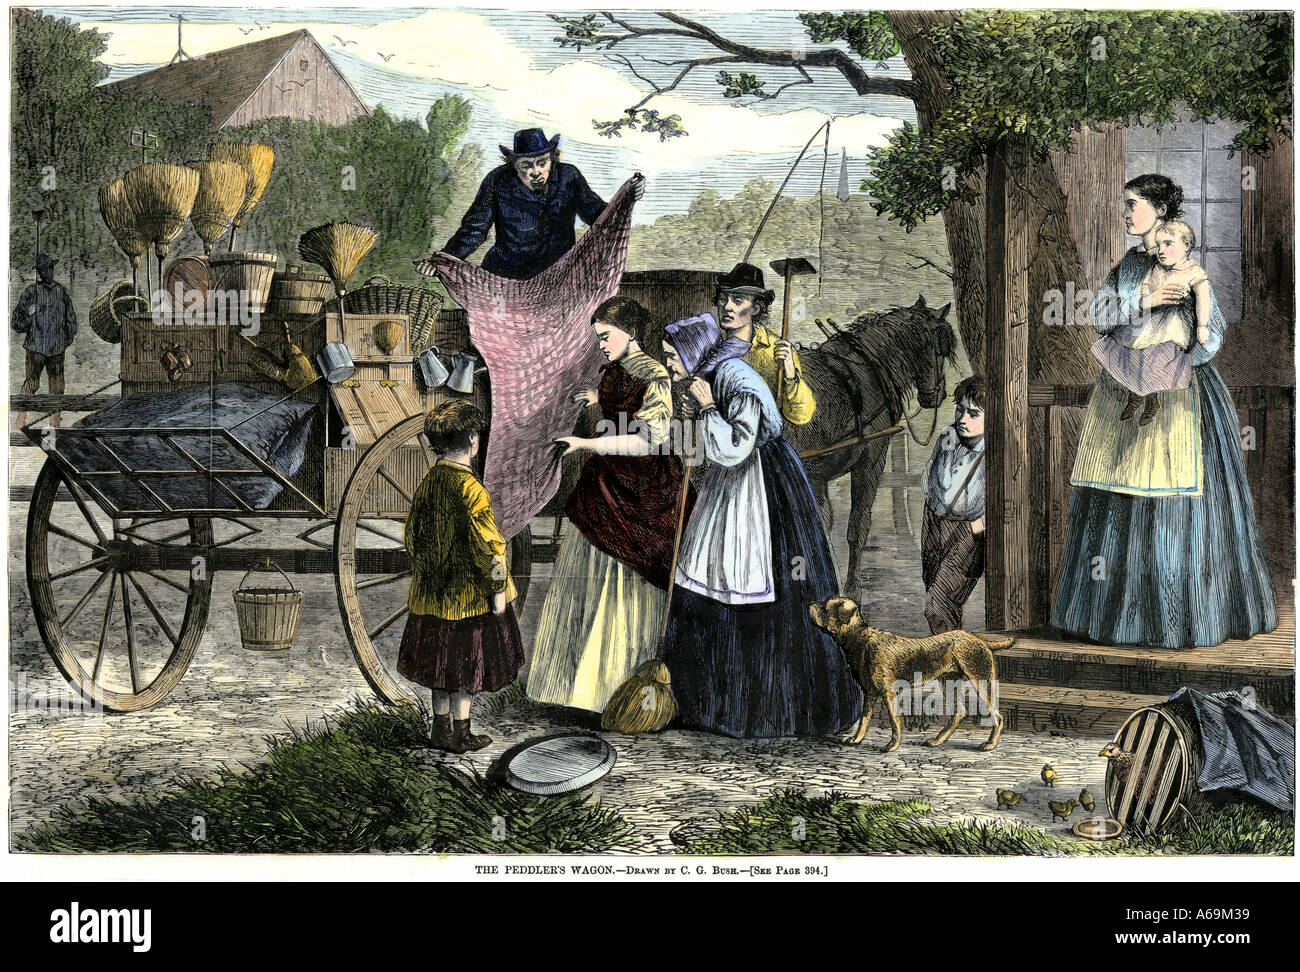 Peddler selling his wares to an American farm family from his horse-drawn wagon 1800s. Hand-colored woodcut Stock Photo